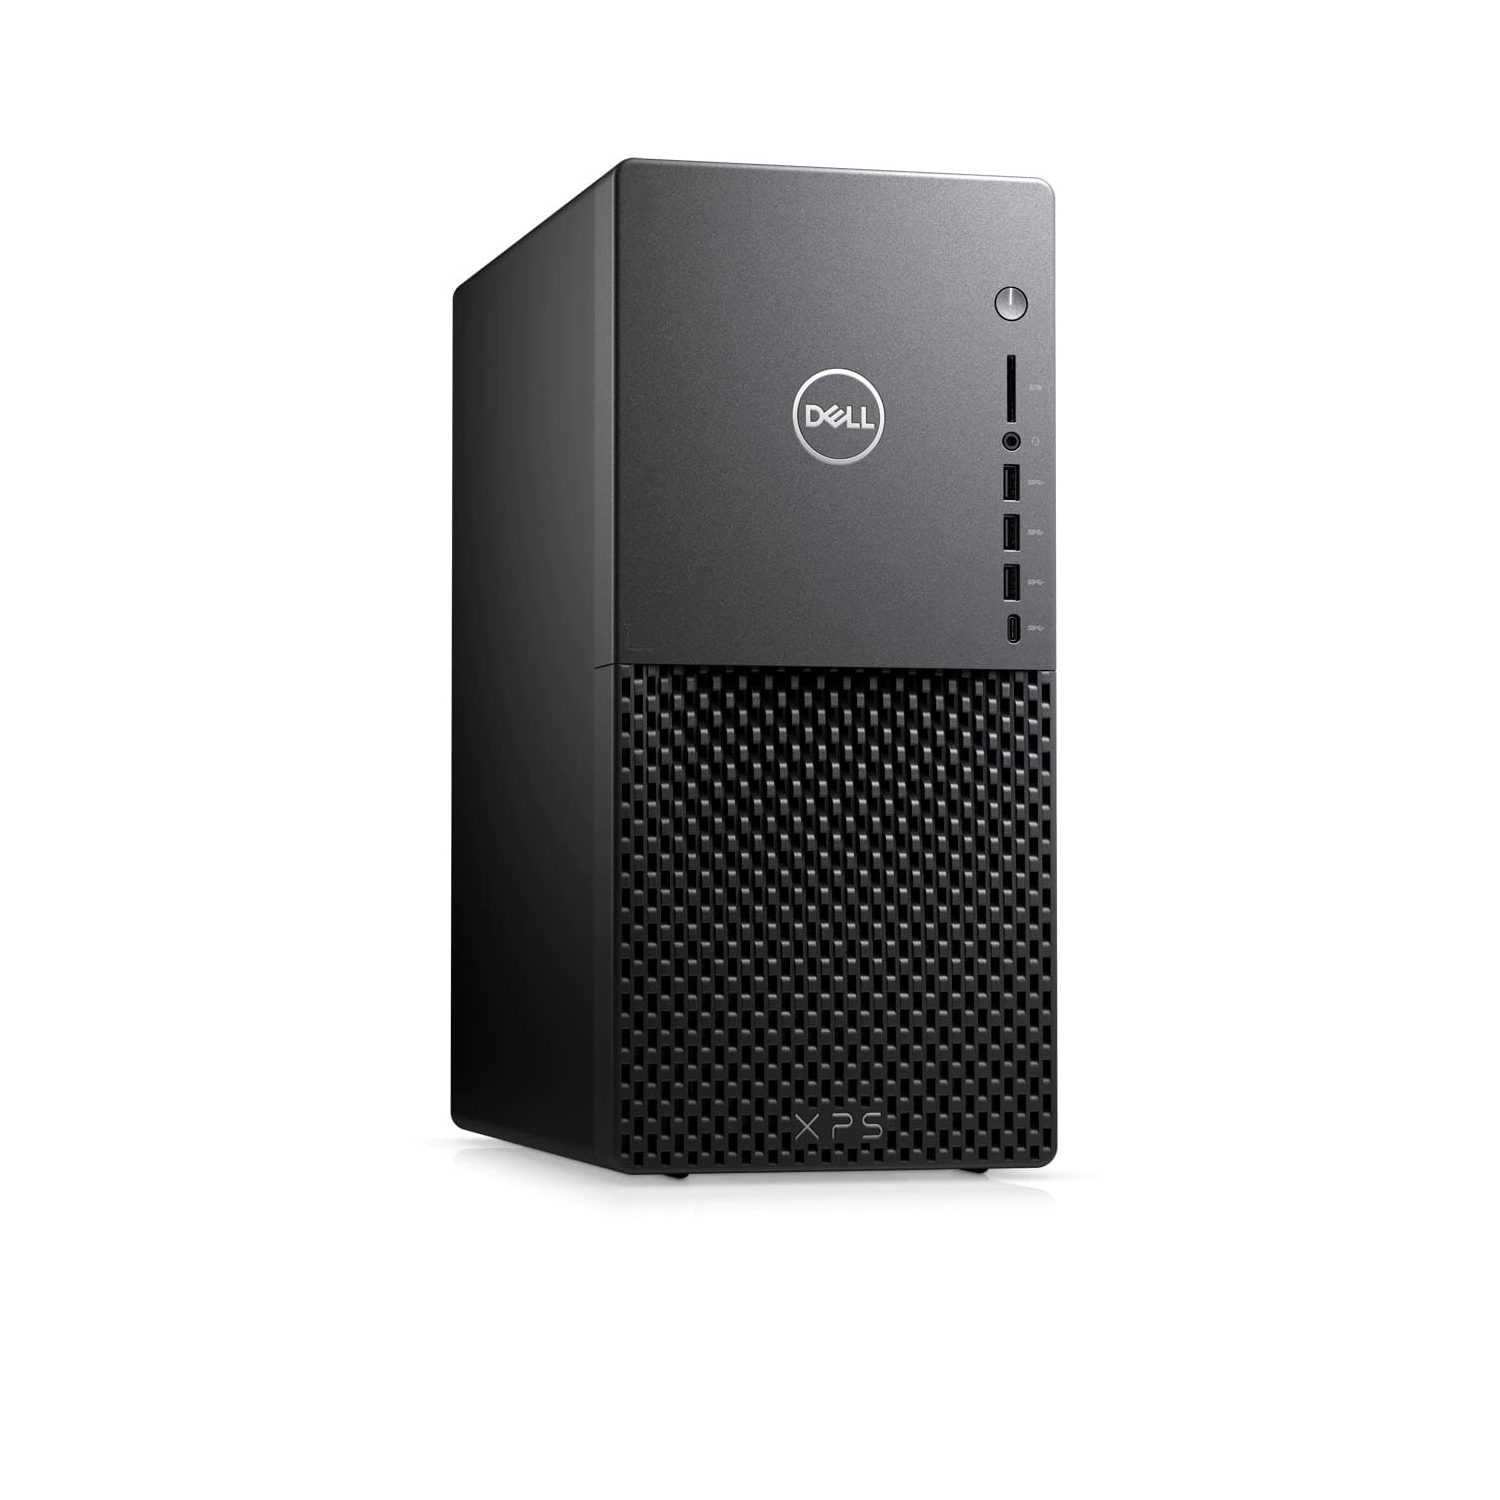 Refurbished (Excellent) - Dell XPS 8940 Desktop (2020) | Core i7 - 1TB SSD + 1TB HDD - 32GB RAM - 3060 Ti | 8 Cores @ 4.8 GHz - 10th Gen CPU Certified Refurbished